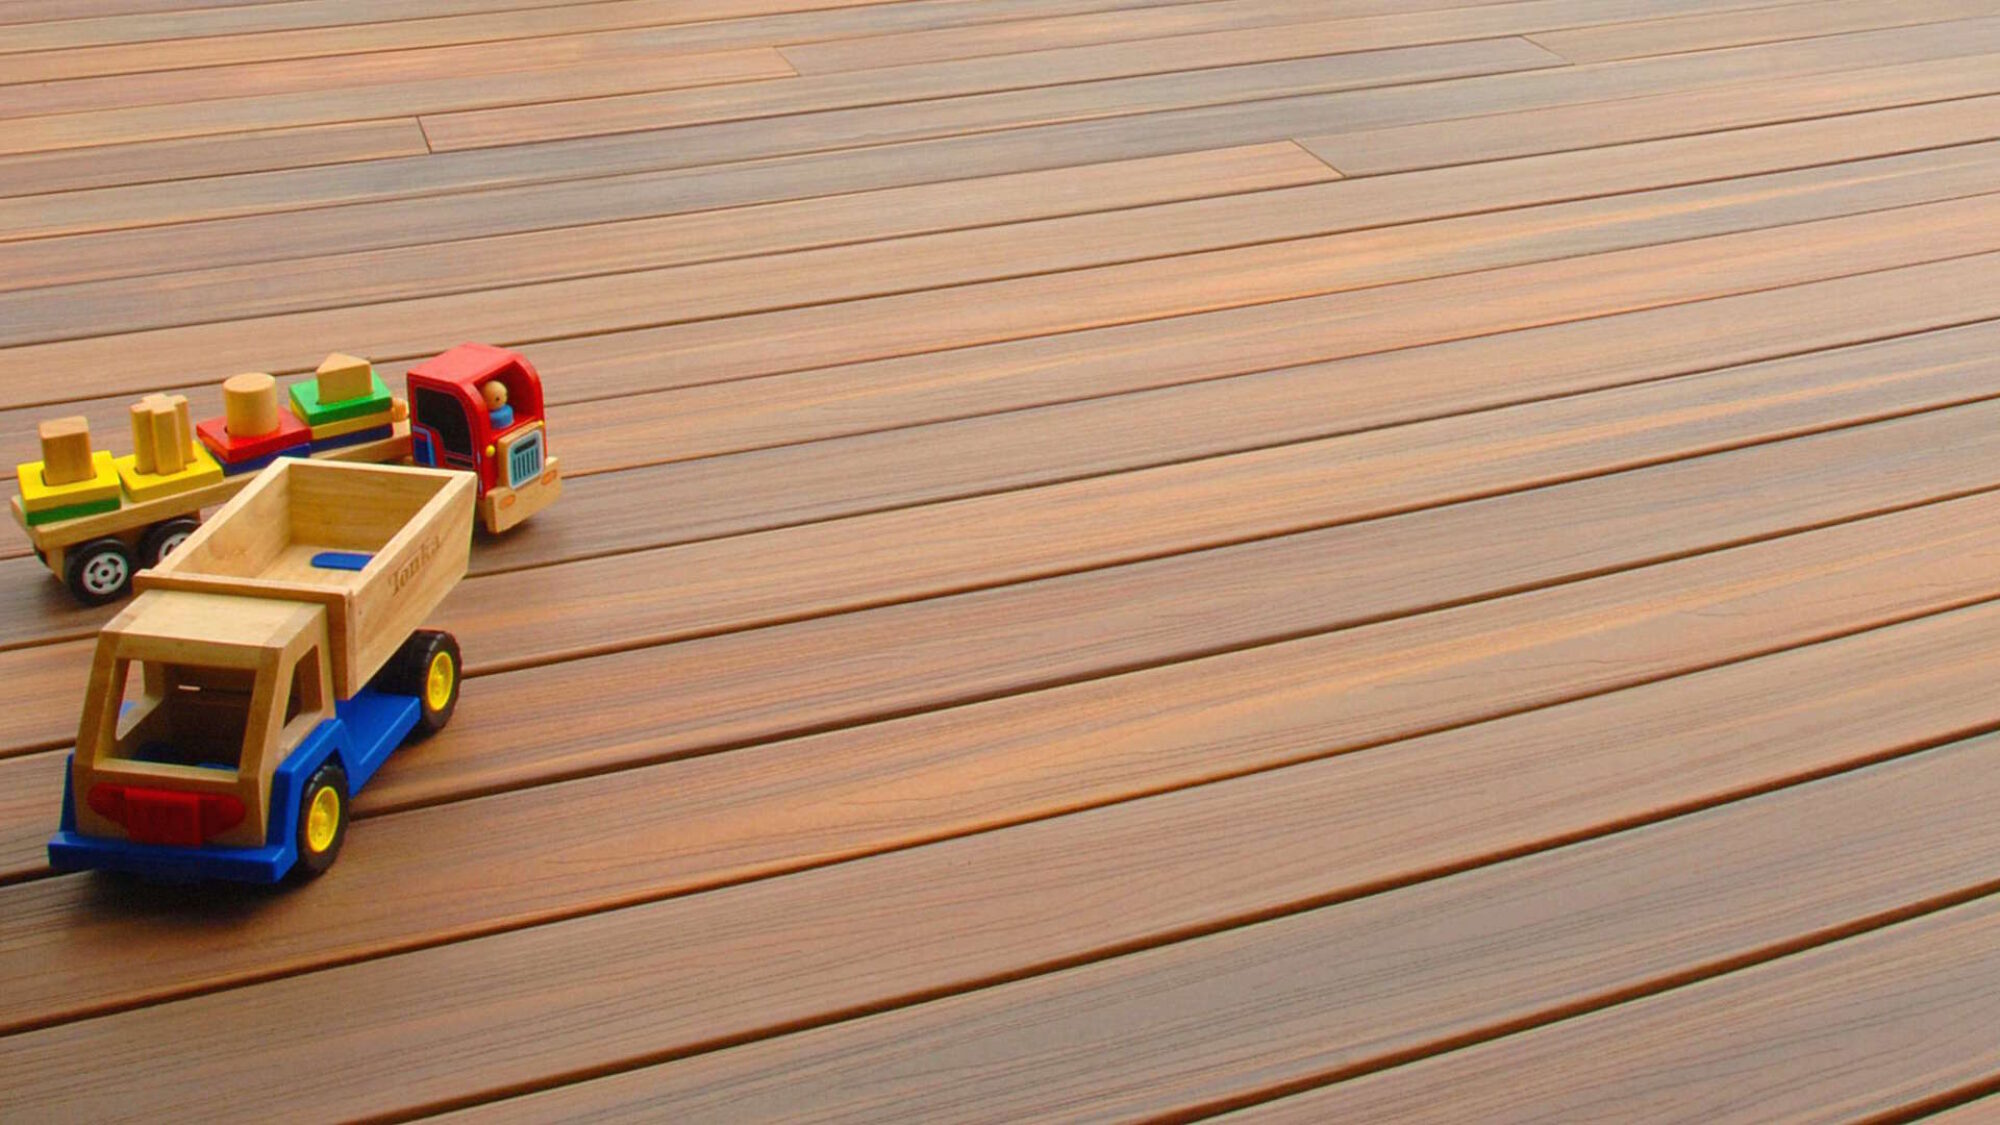 Capped or Uncapped: How is Composite Decking Made?